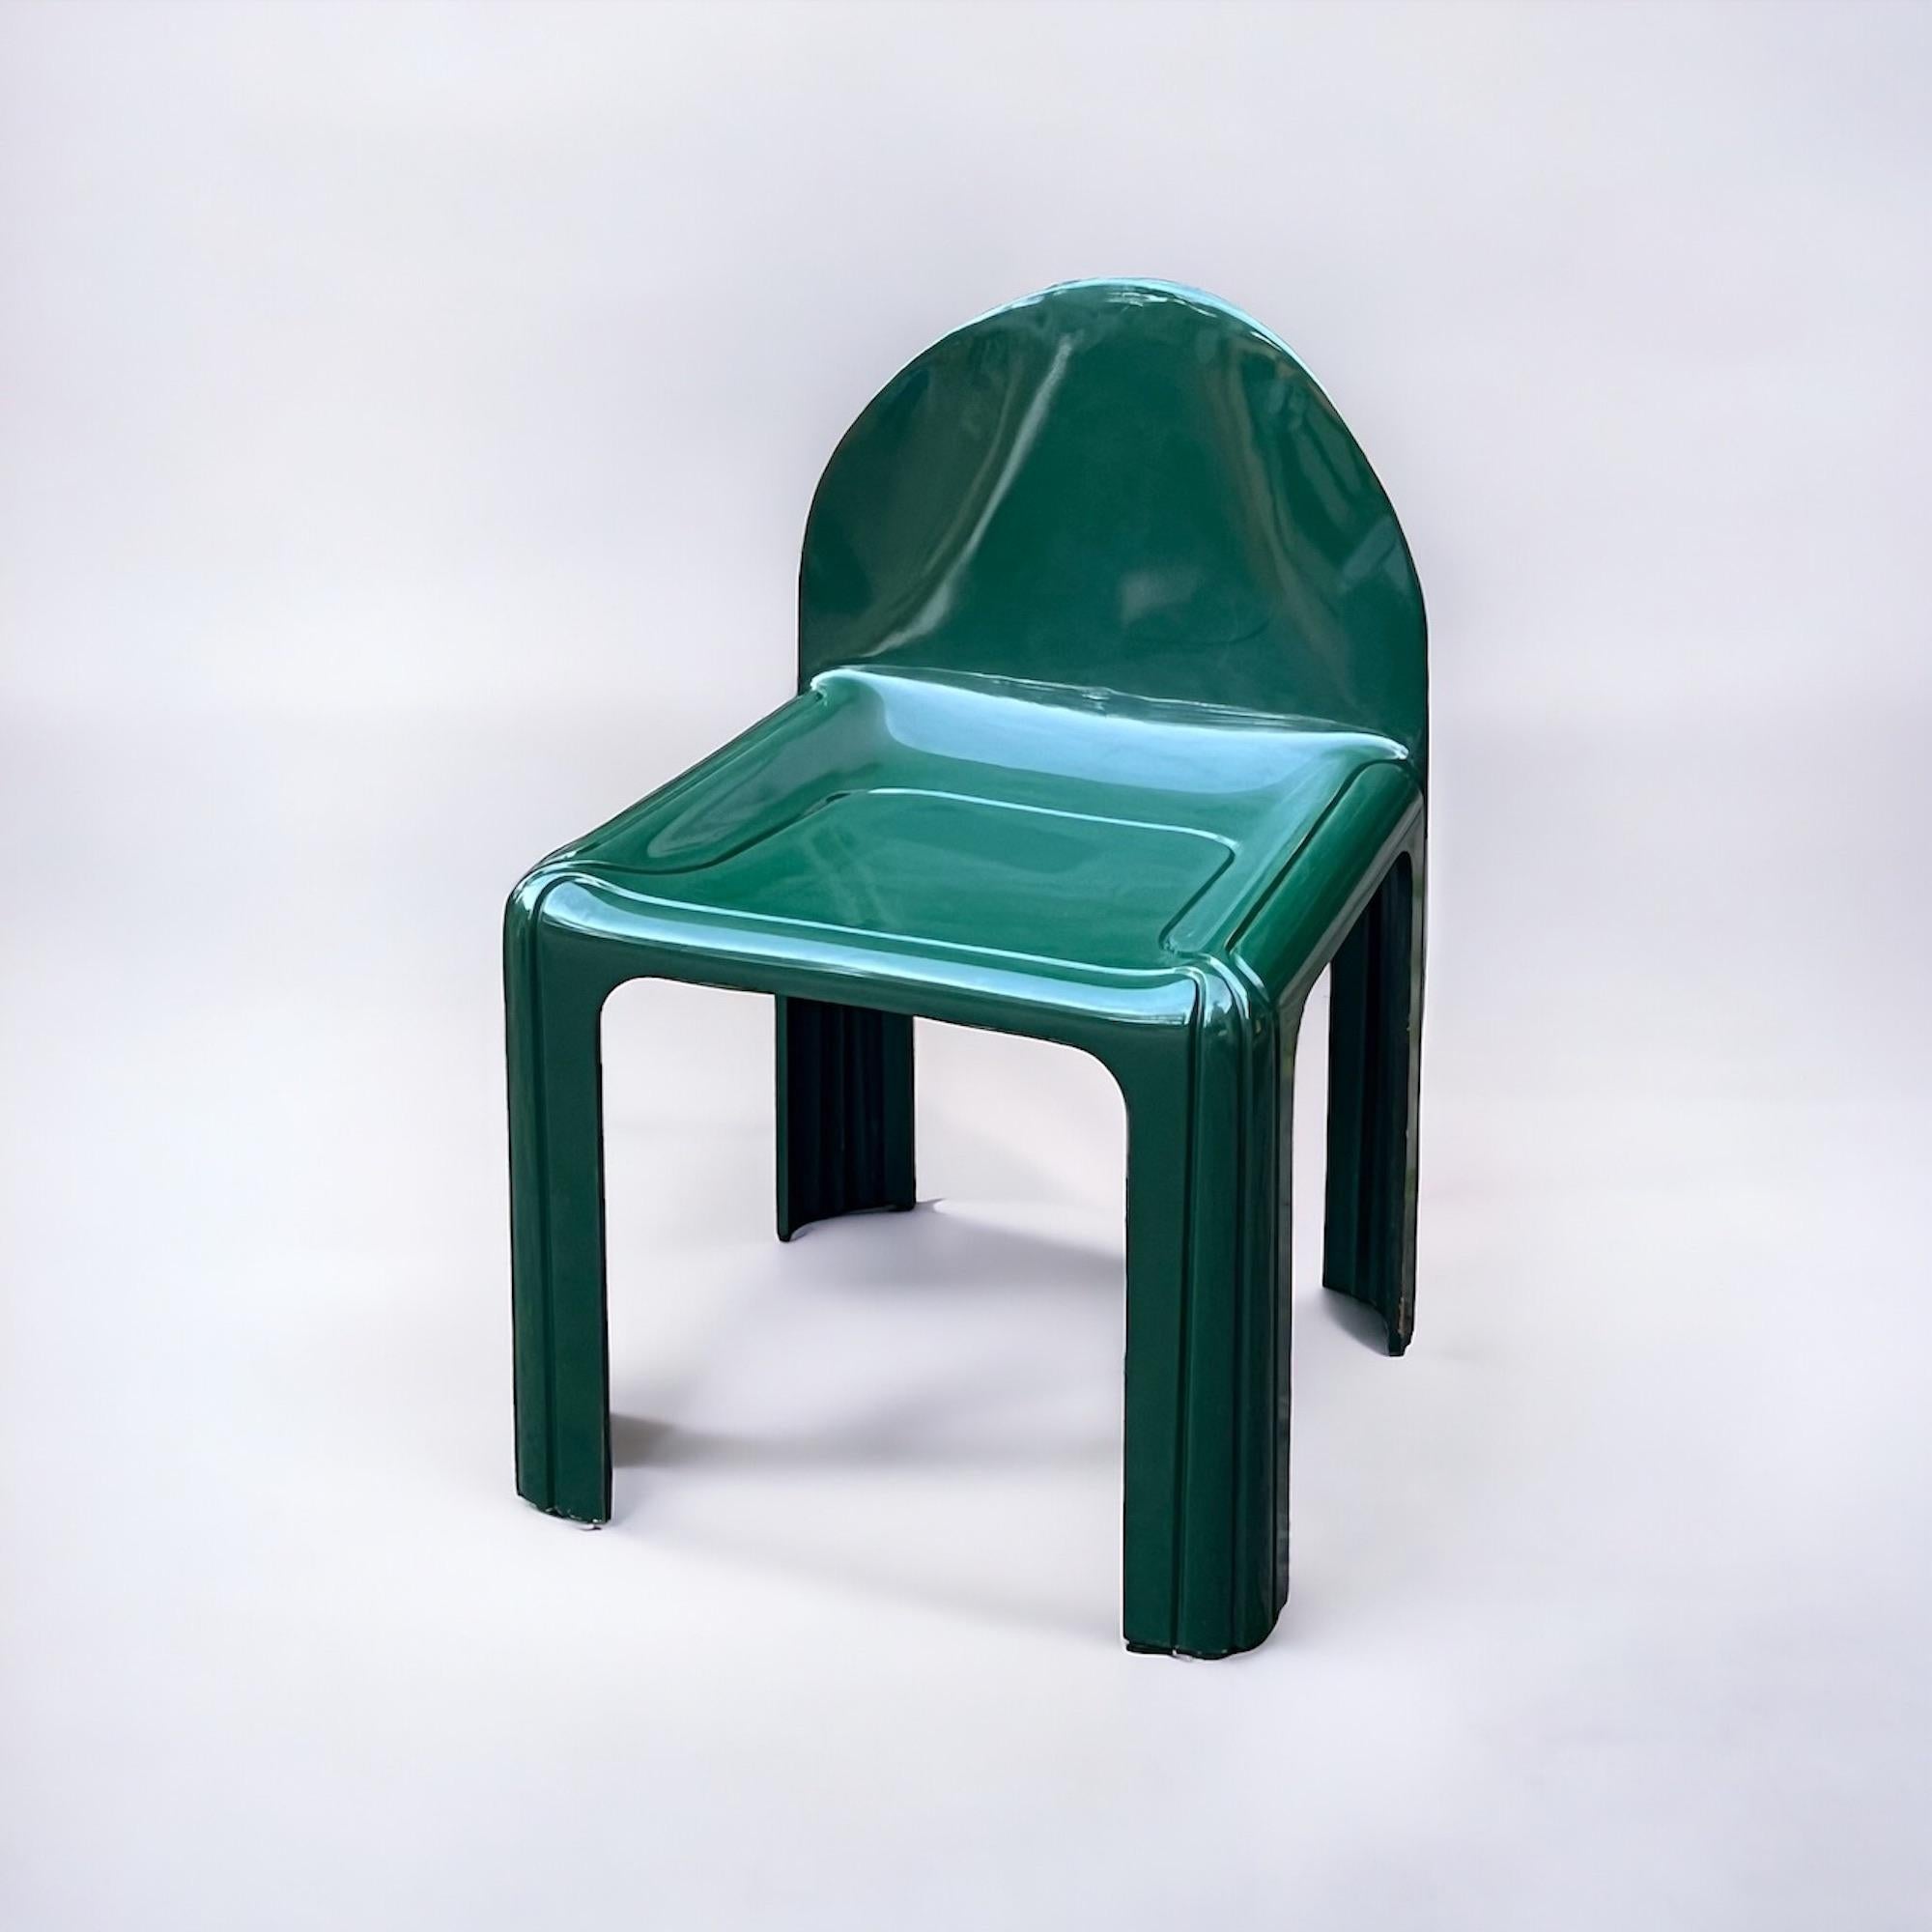 Mid-20th Century Set of 4 Green Resin Kartell Model 4854 Chairs by Gae Aulenti, 1960s For Sale